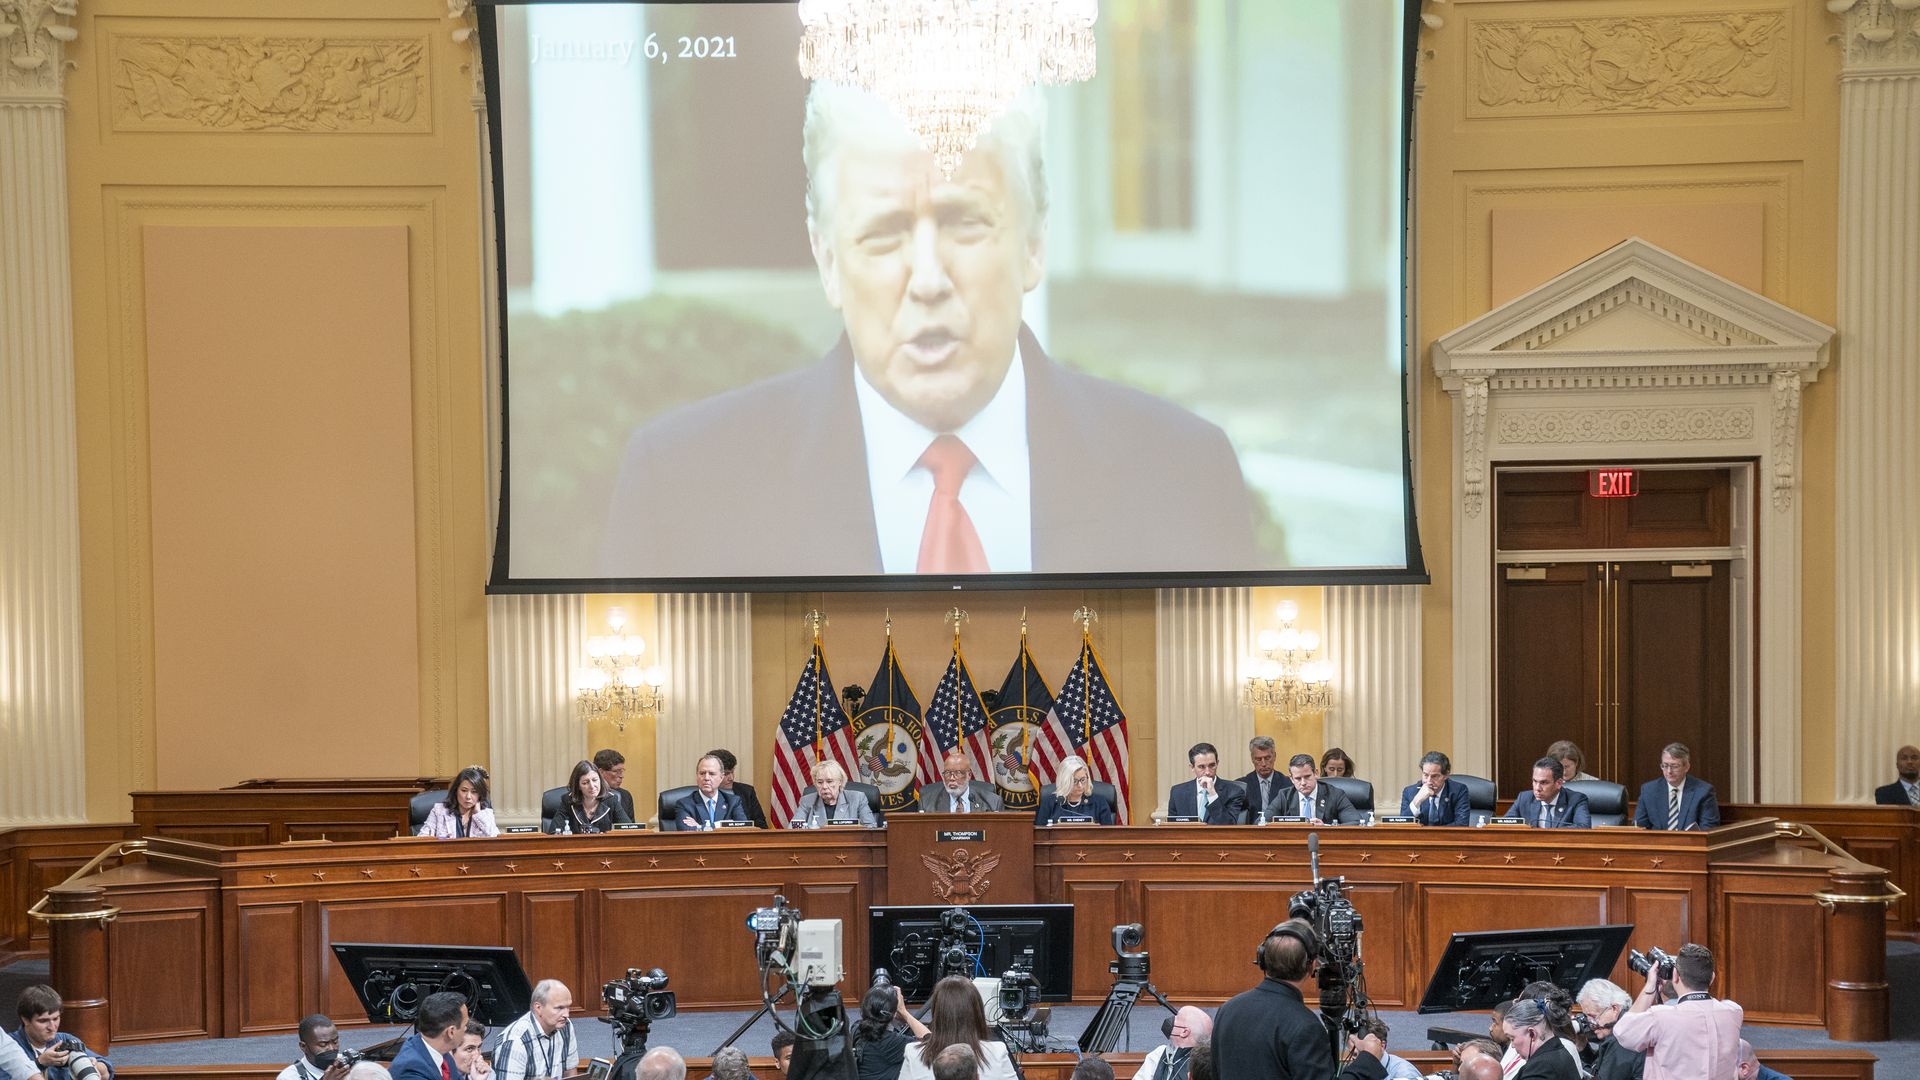  A video of former President Donald Trump is played during a Jan. 6 hearing